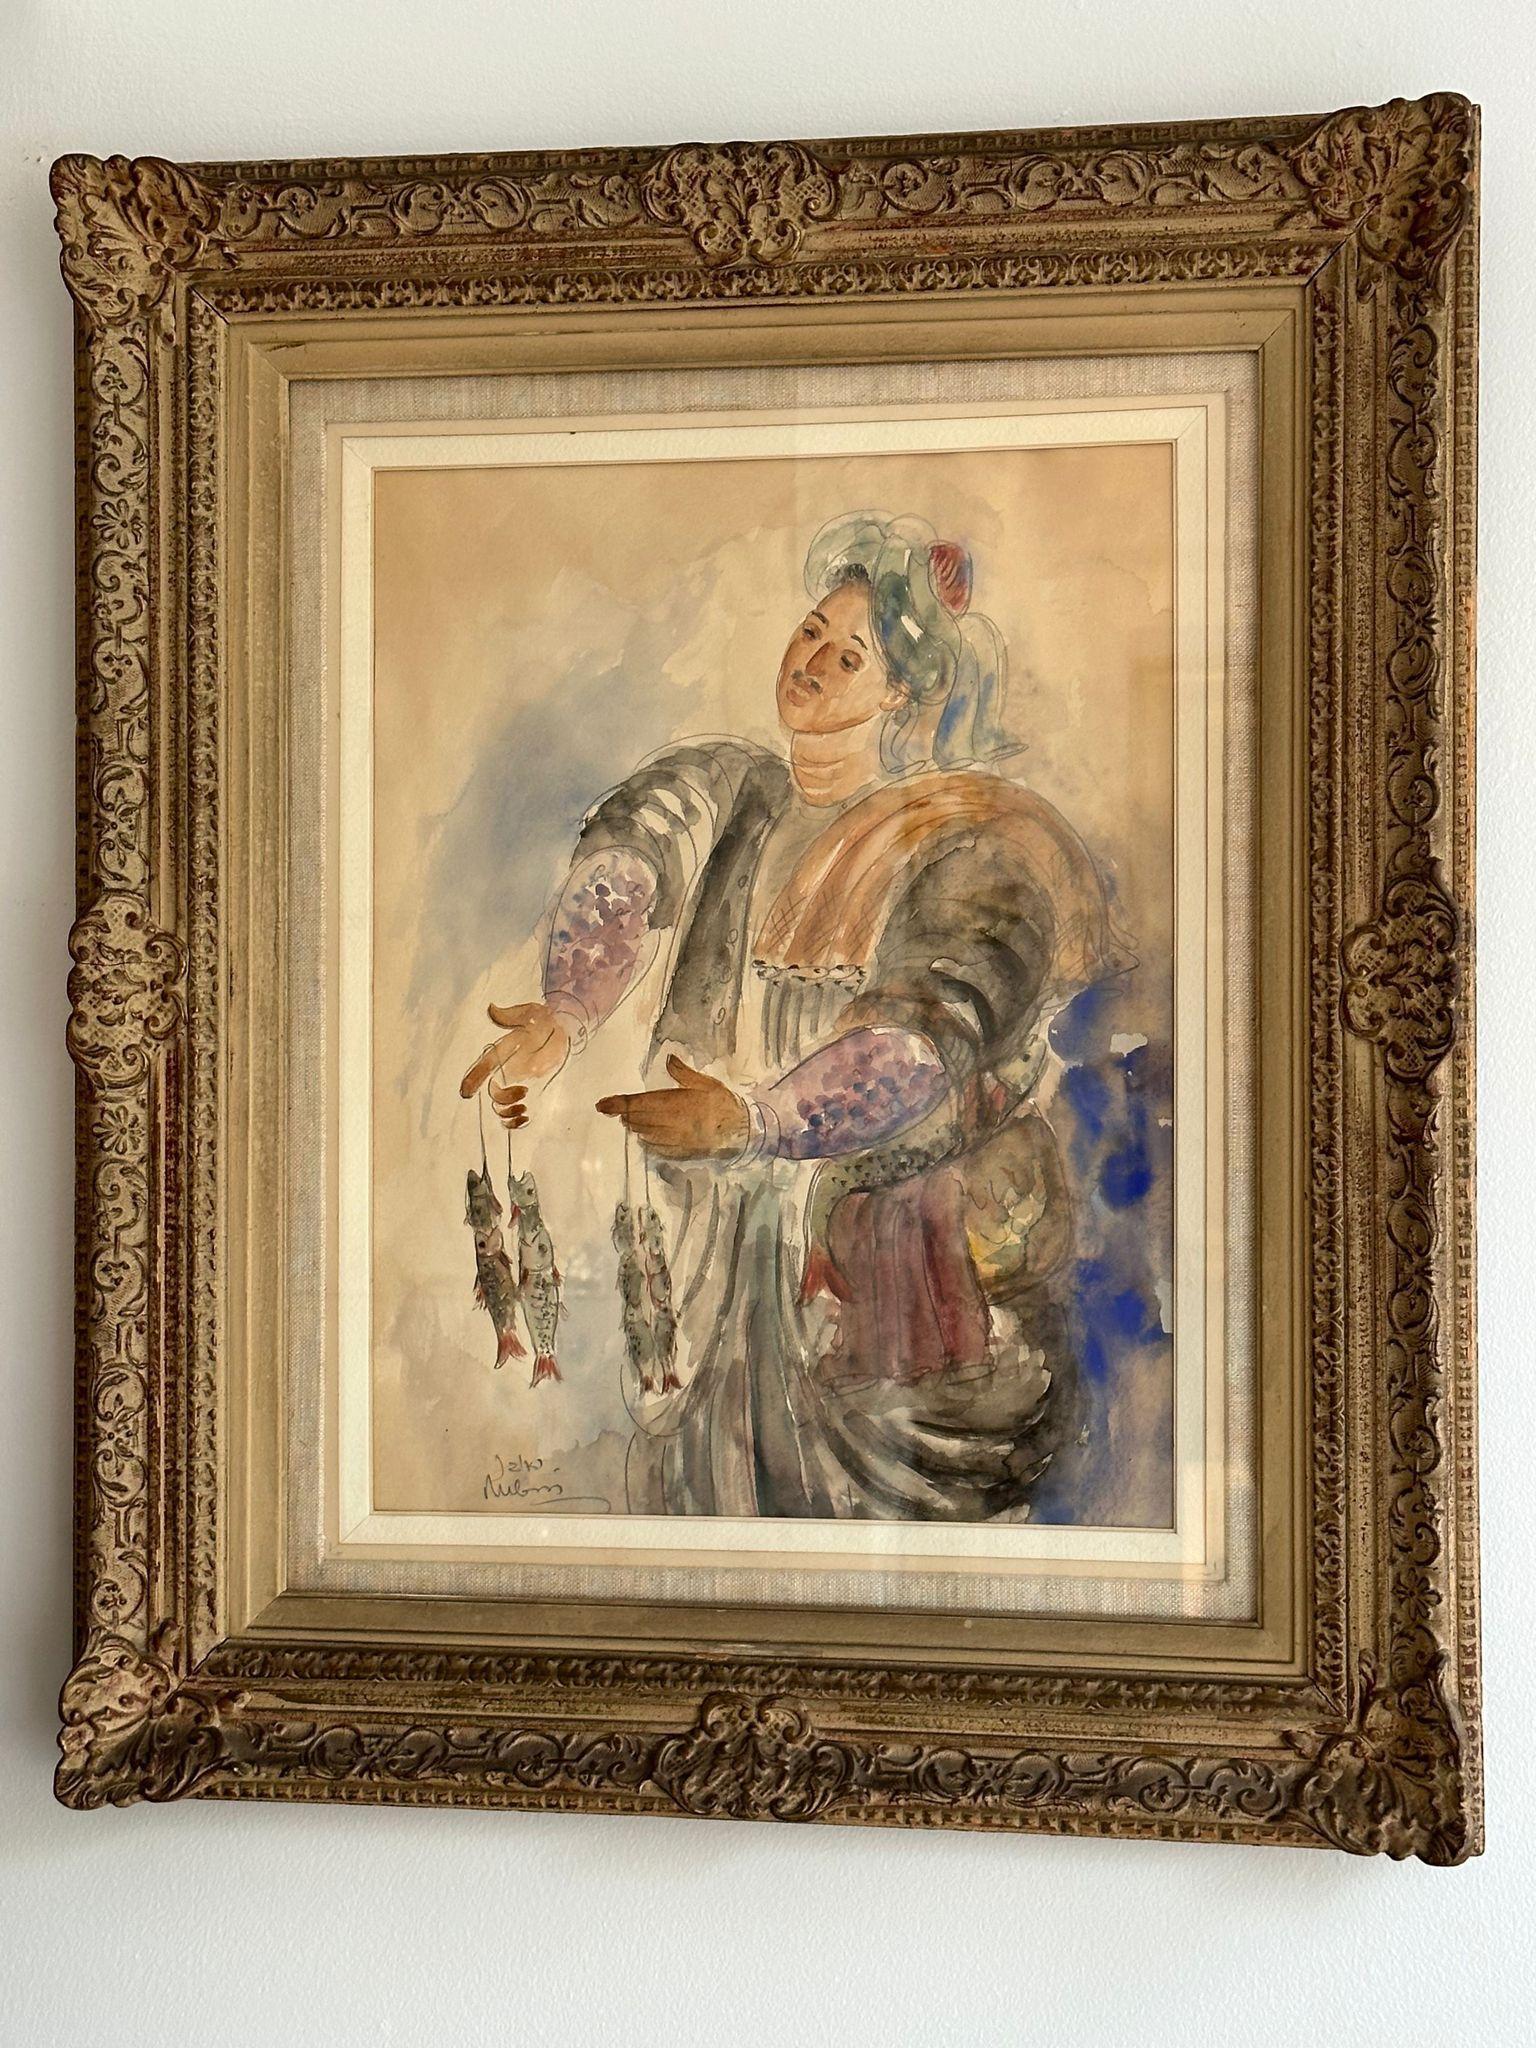 Fisherman by Reuven Rubin (1893-1974), watercolor on paper.
Signed lower left, Rubin in English and Reuben in Hebrew. 
Dimensions with frame: 43x63 cm
Original frame included. 
An Arab Fisherman occupies the central figure in this marvelous